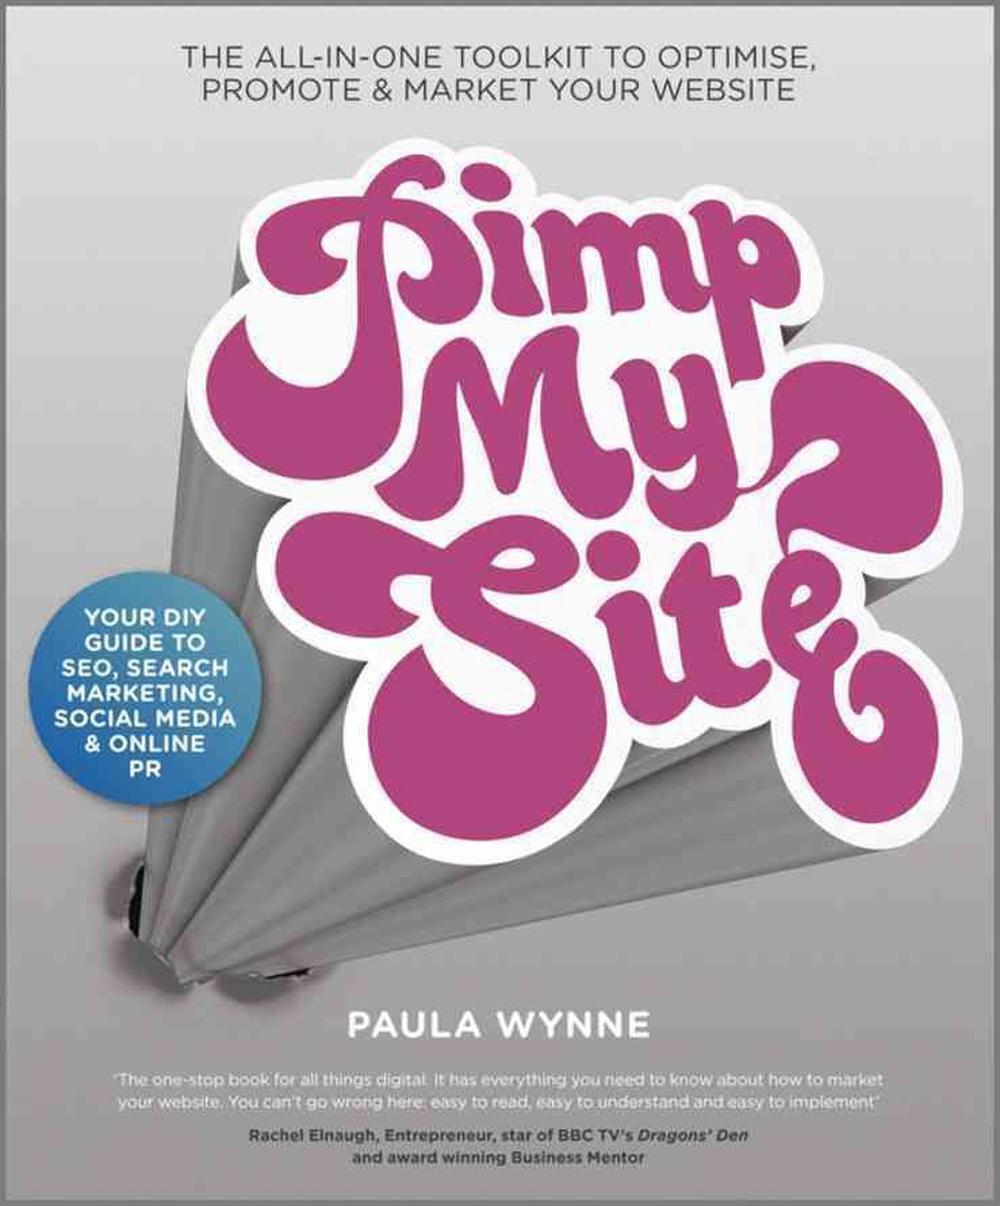 Pimp My Site: The DIY Guide to SEO, Search Marketing, Social Media and Online PR